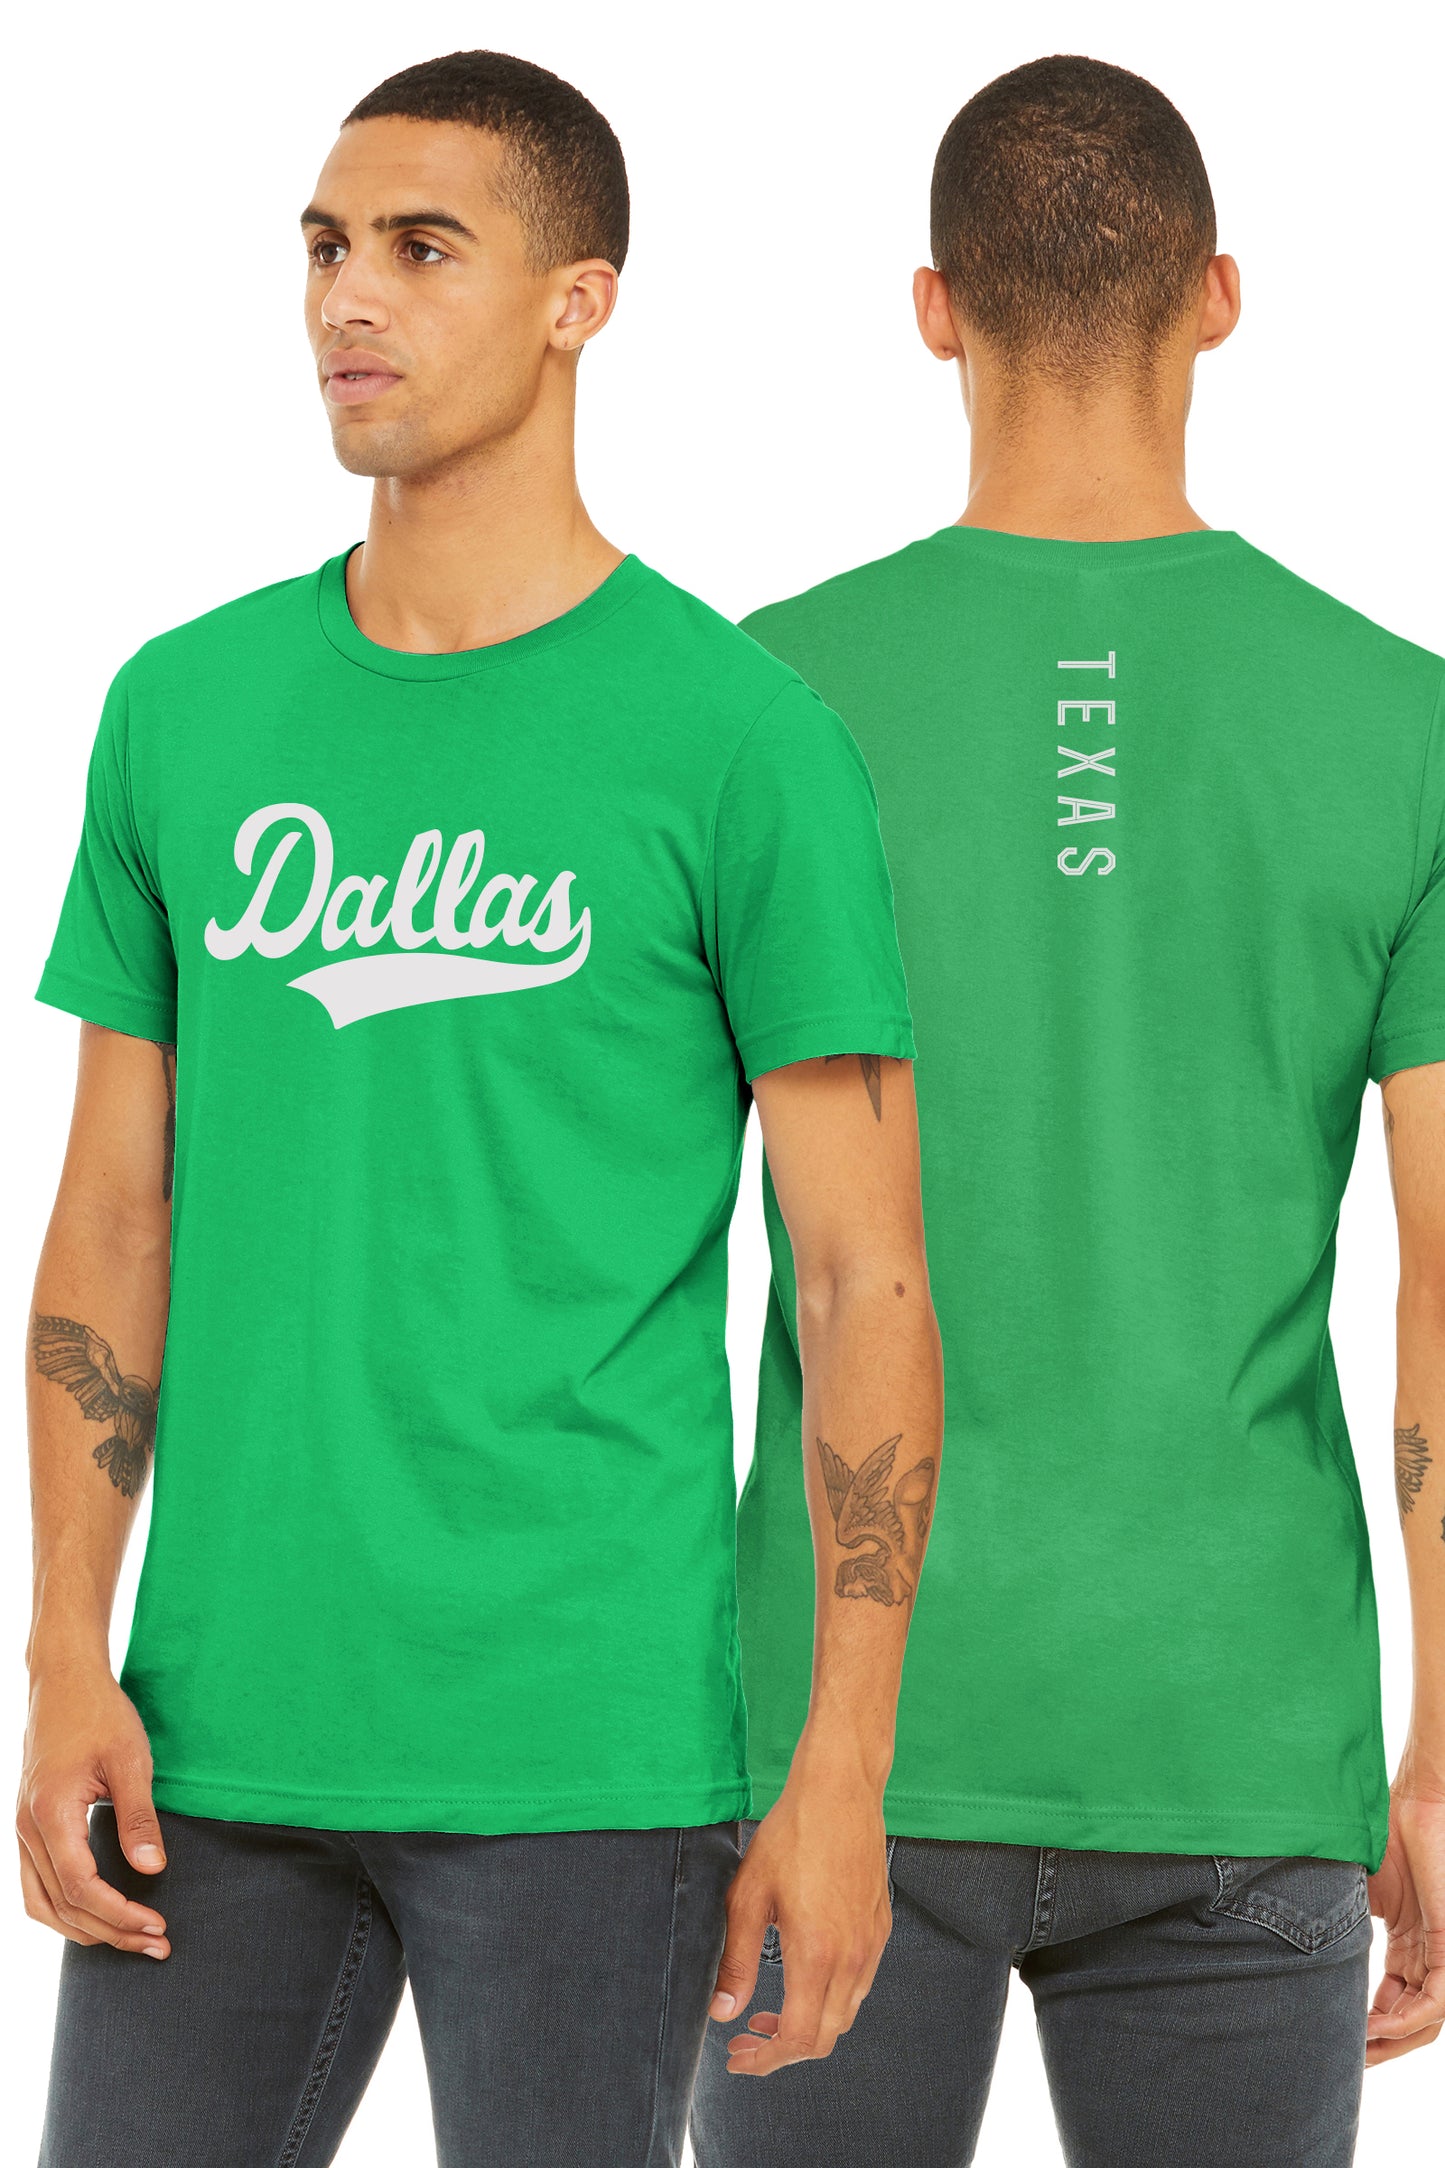 Daxton Adult Unisex Tshirt Dallas Script with Texas Vertical on the Back